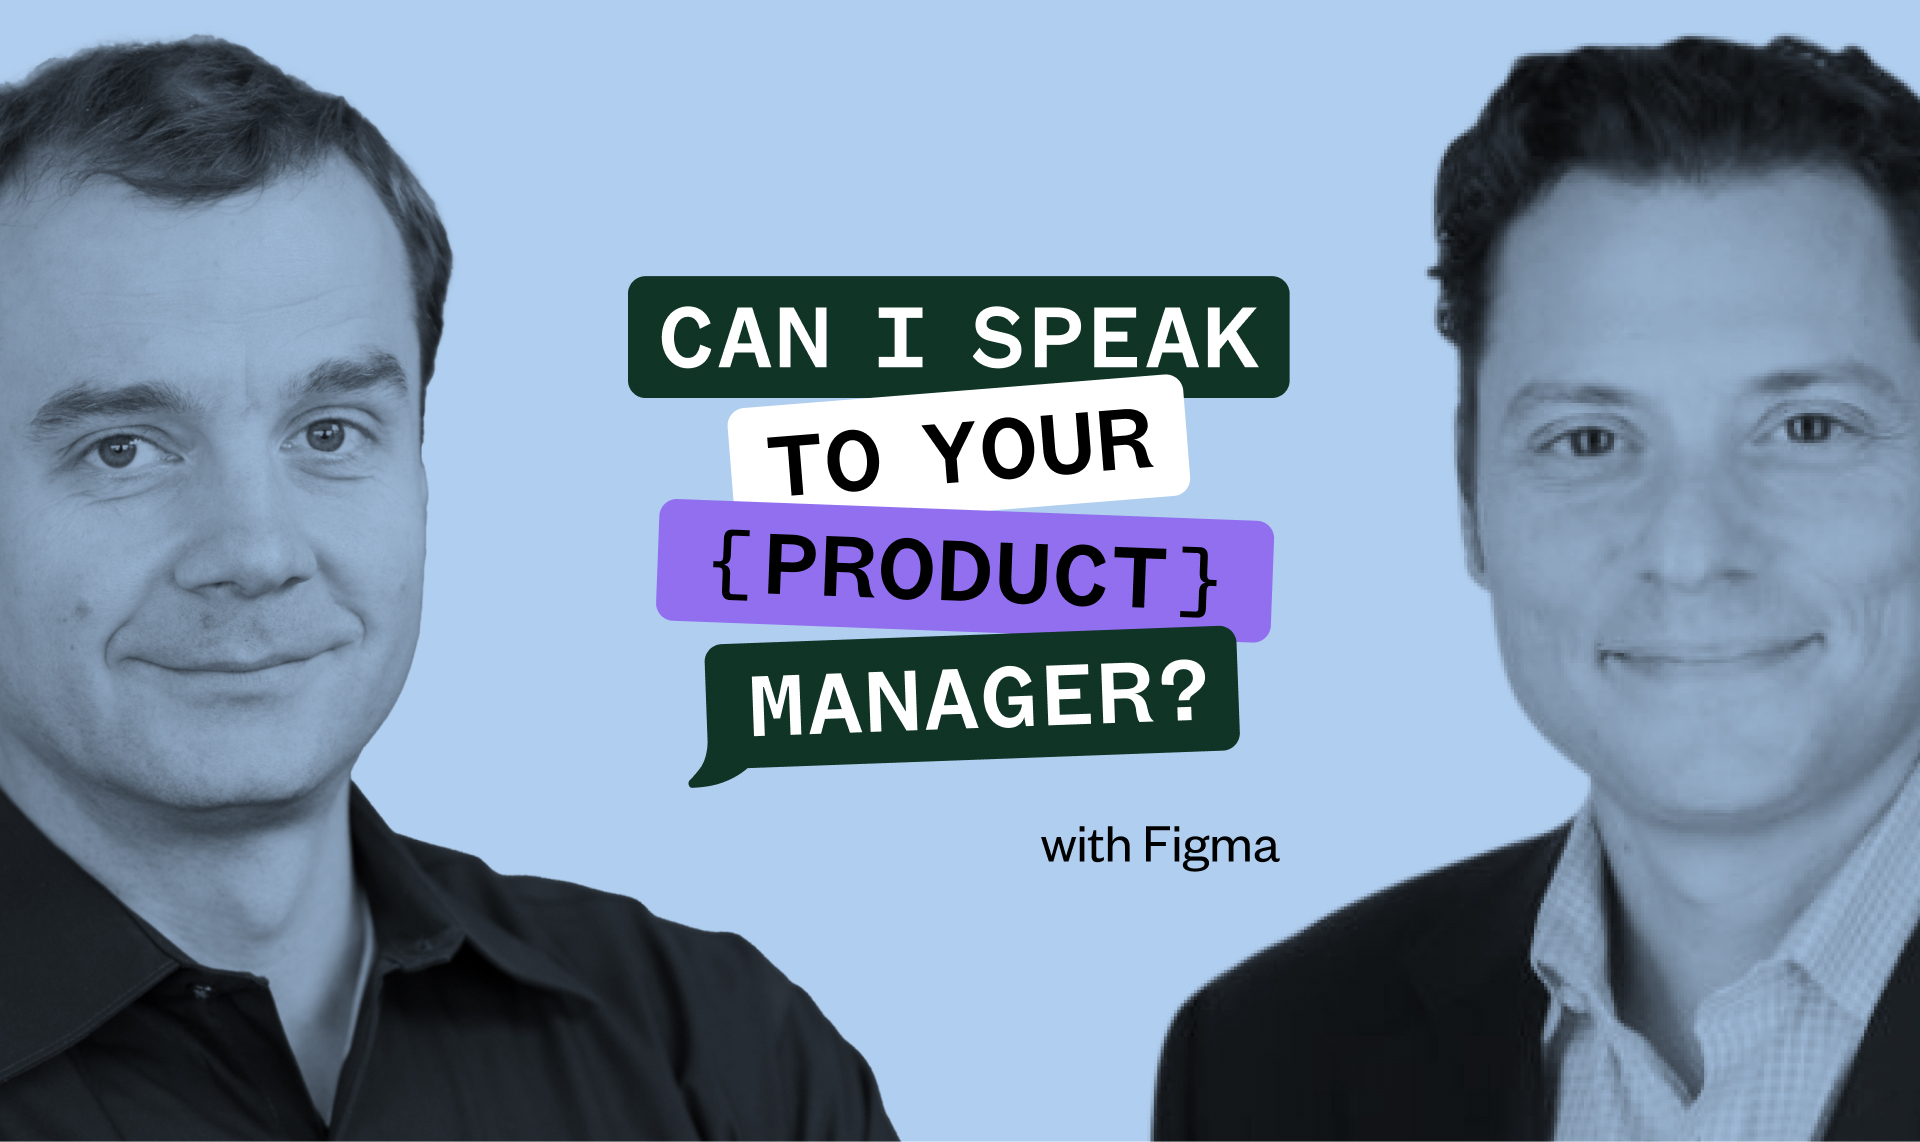 Two men smile at the camera with a text overlay: "Can I speak to your {Product} Manager?" with Figma. The background is light blue.